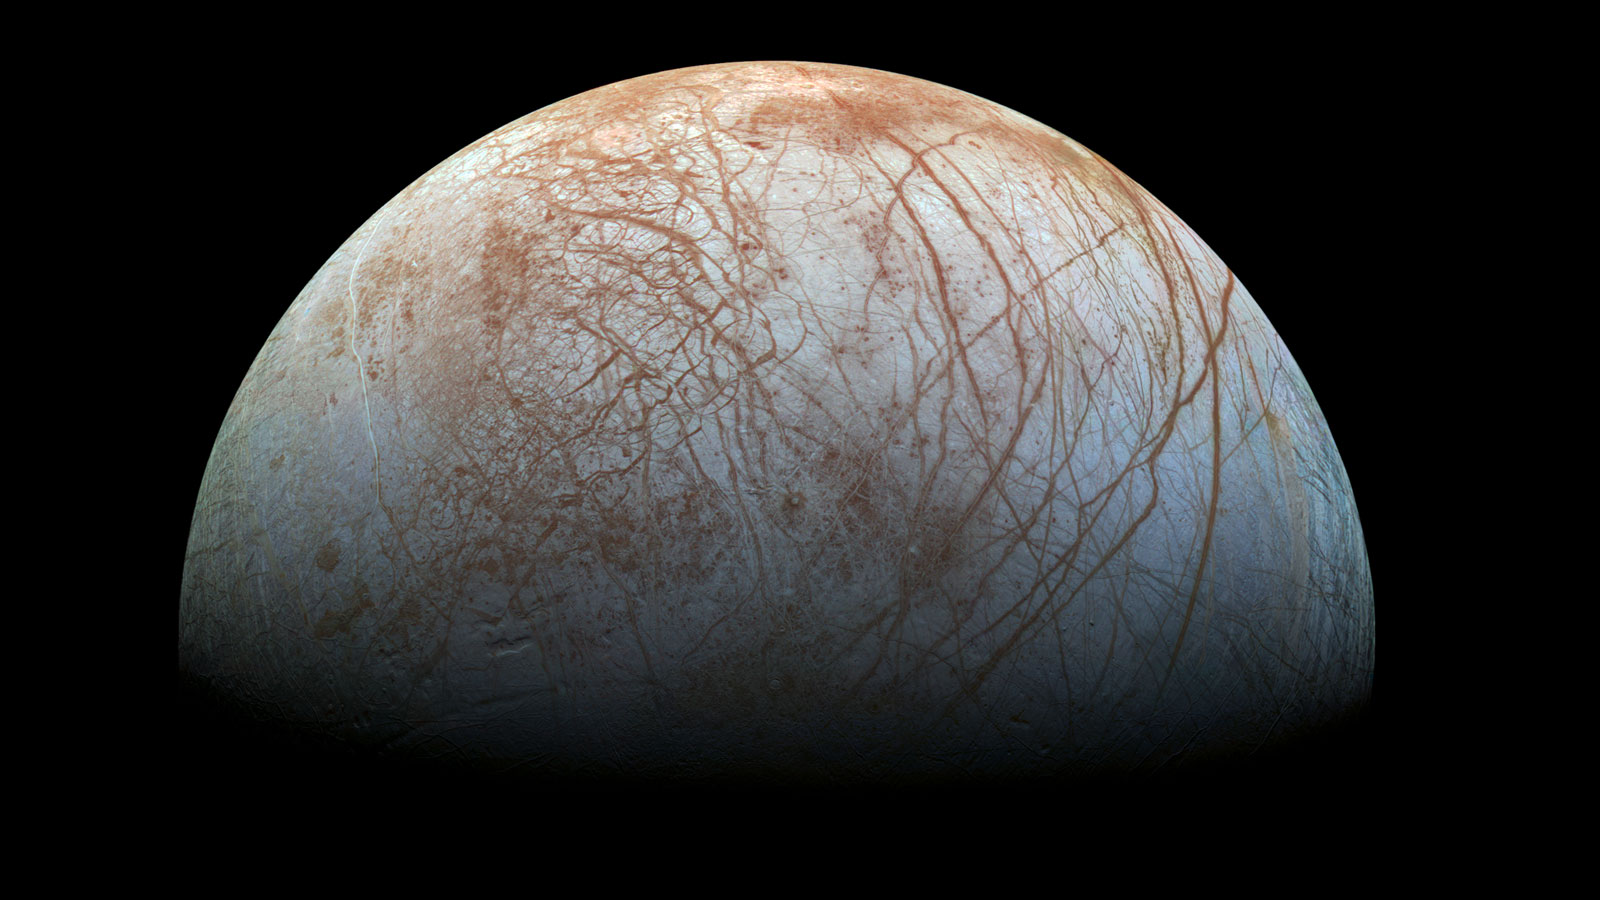 Data from 1997 just gave us new insight into Europa—our best chance at finding alien life